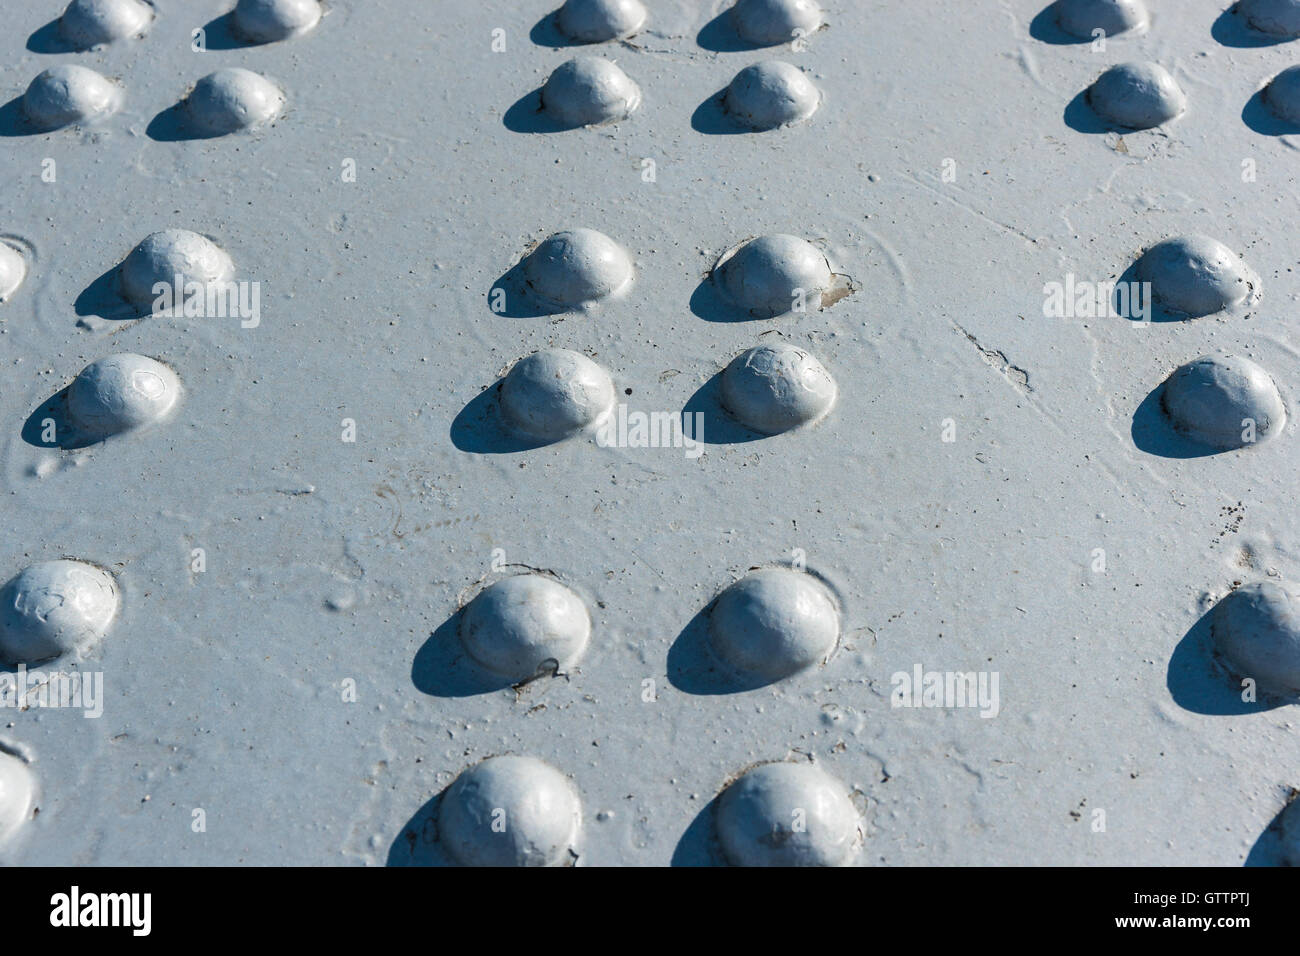 Sunlit gray painted metal surface with several rows of rivet heads Stock Photo